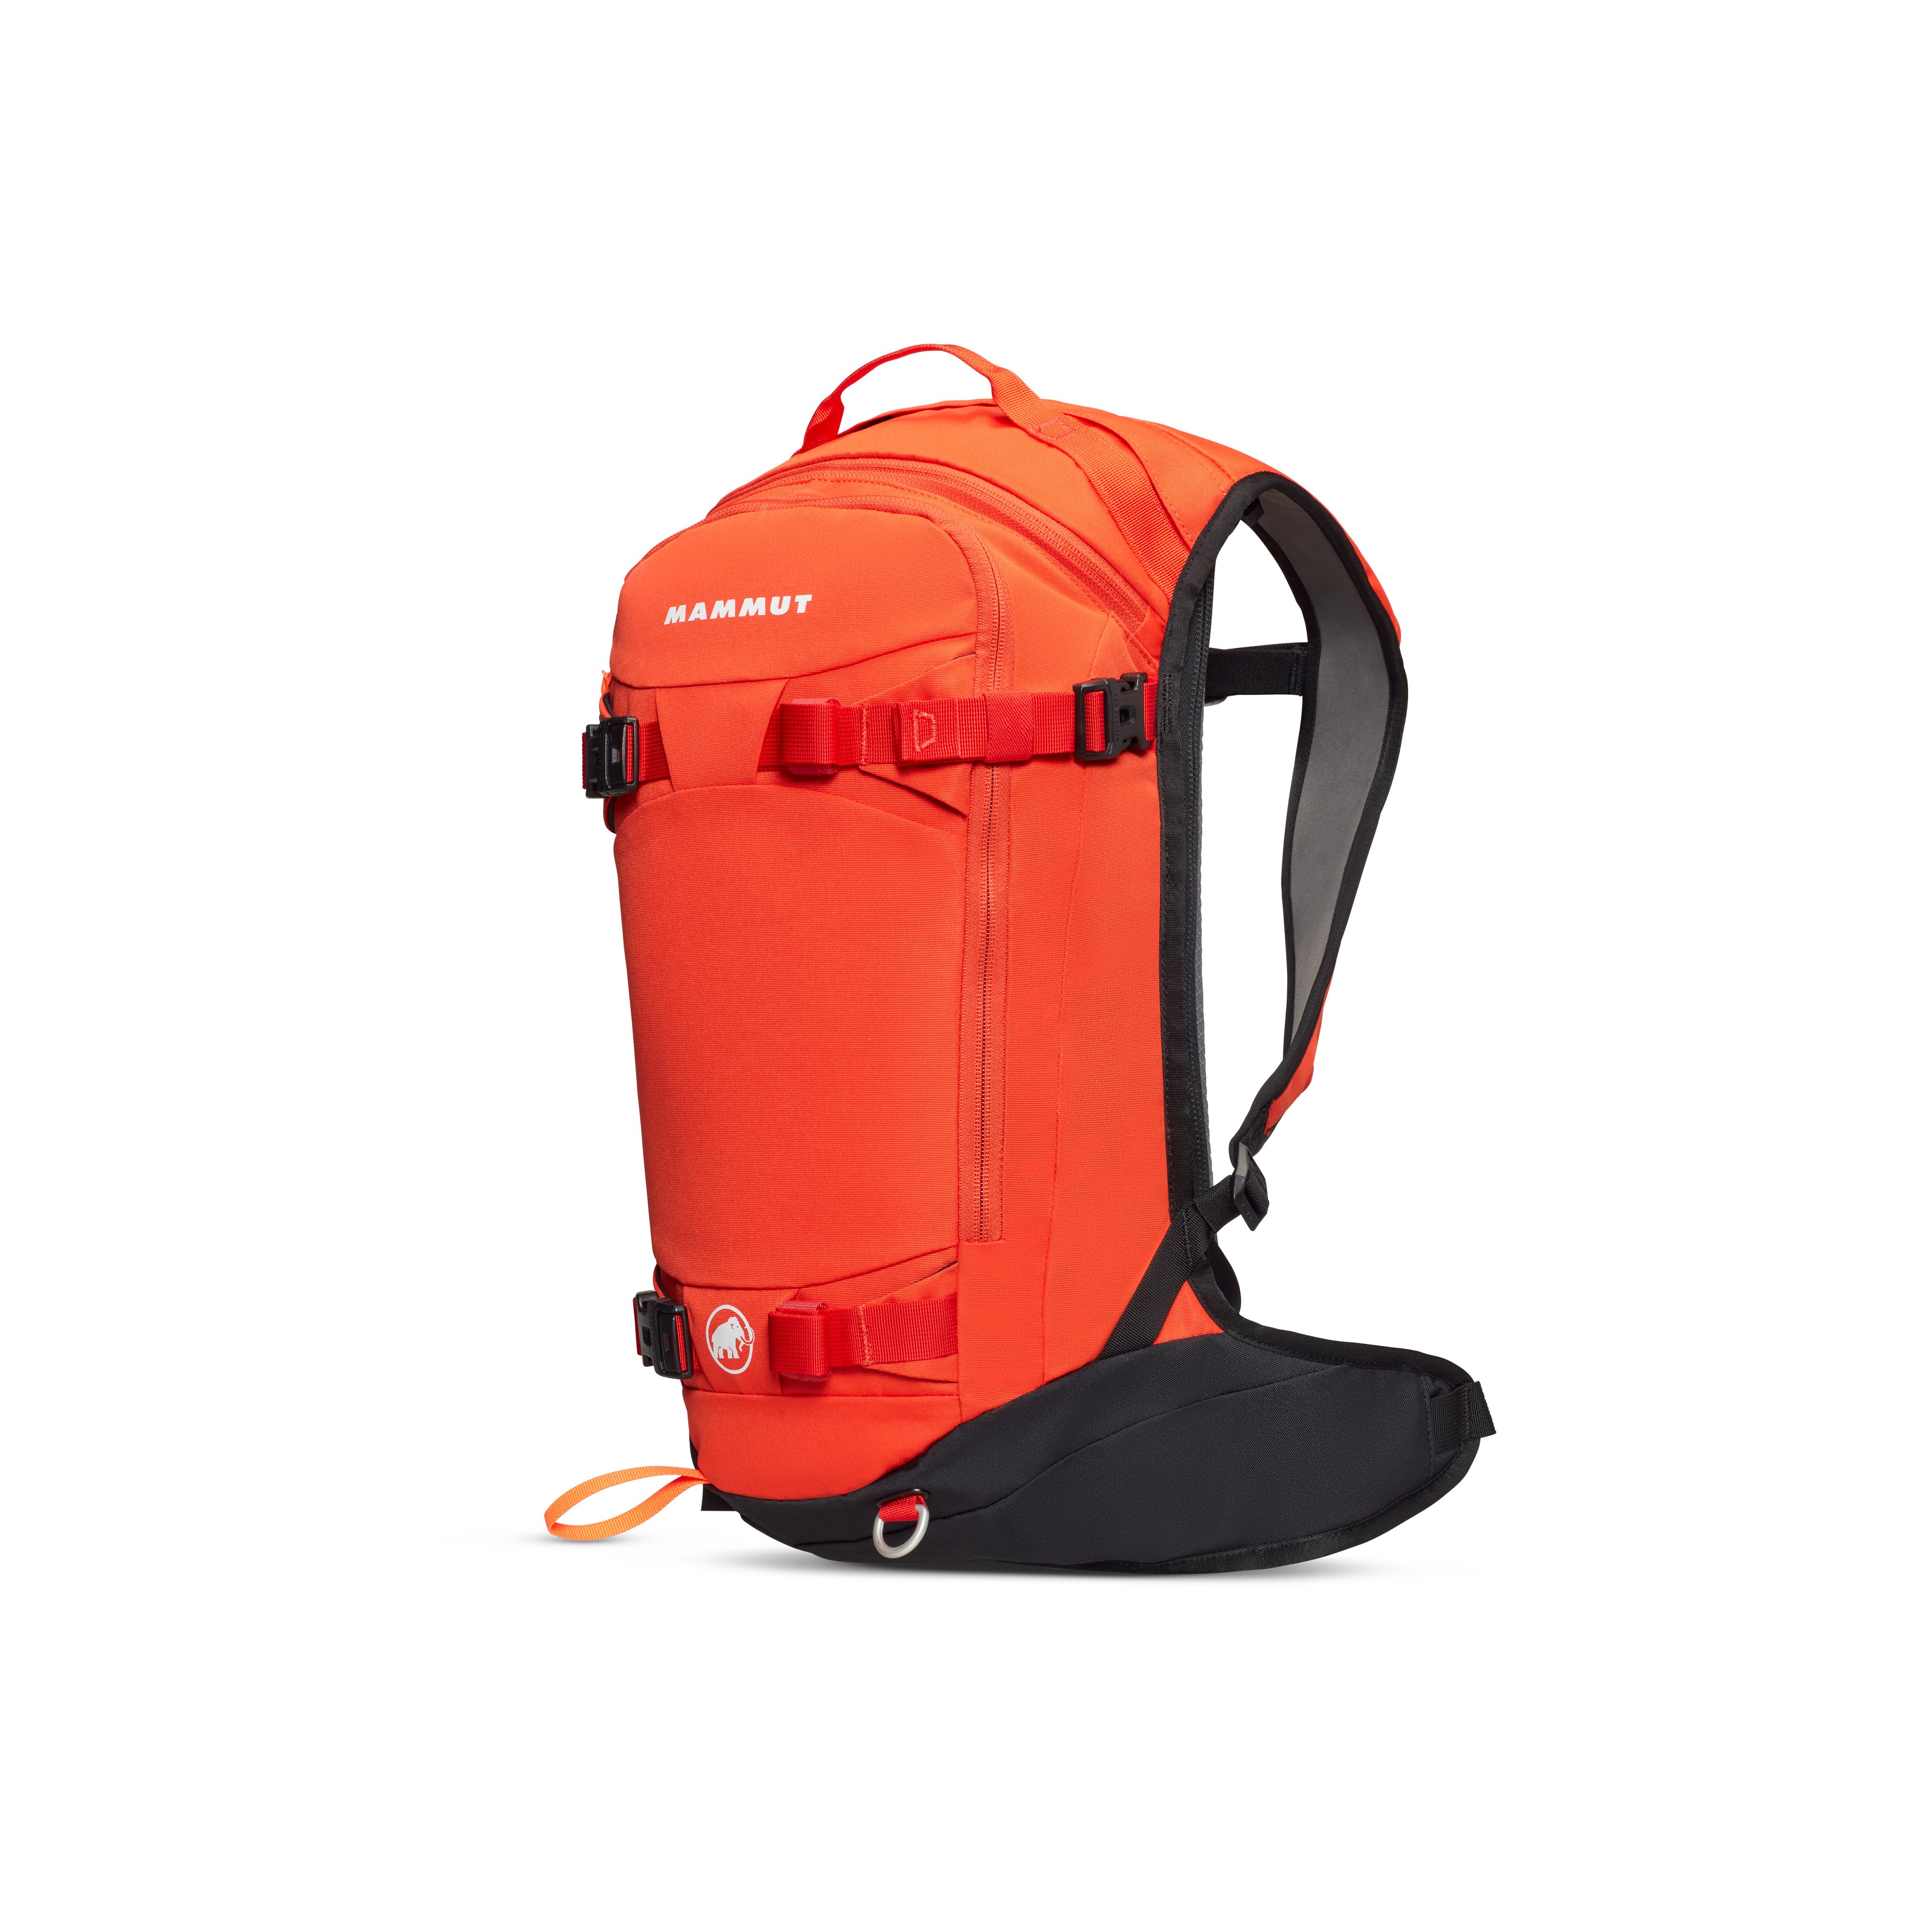 Nirvana 25 - hot red-black, 25 L product image